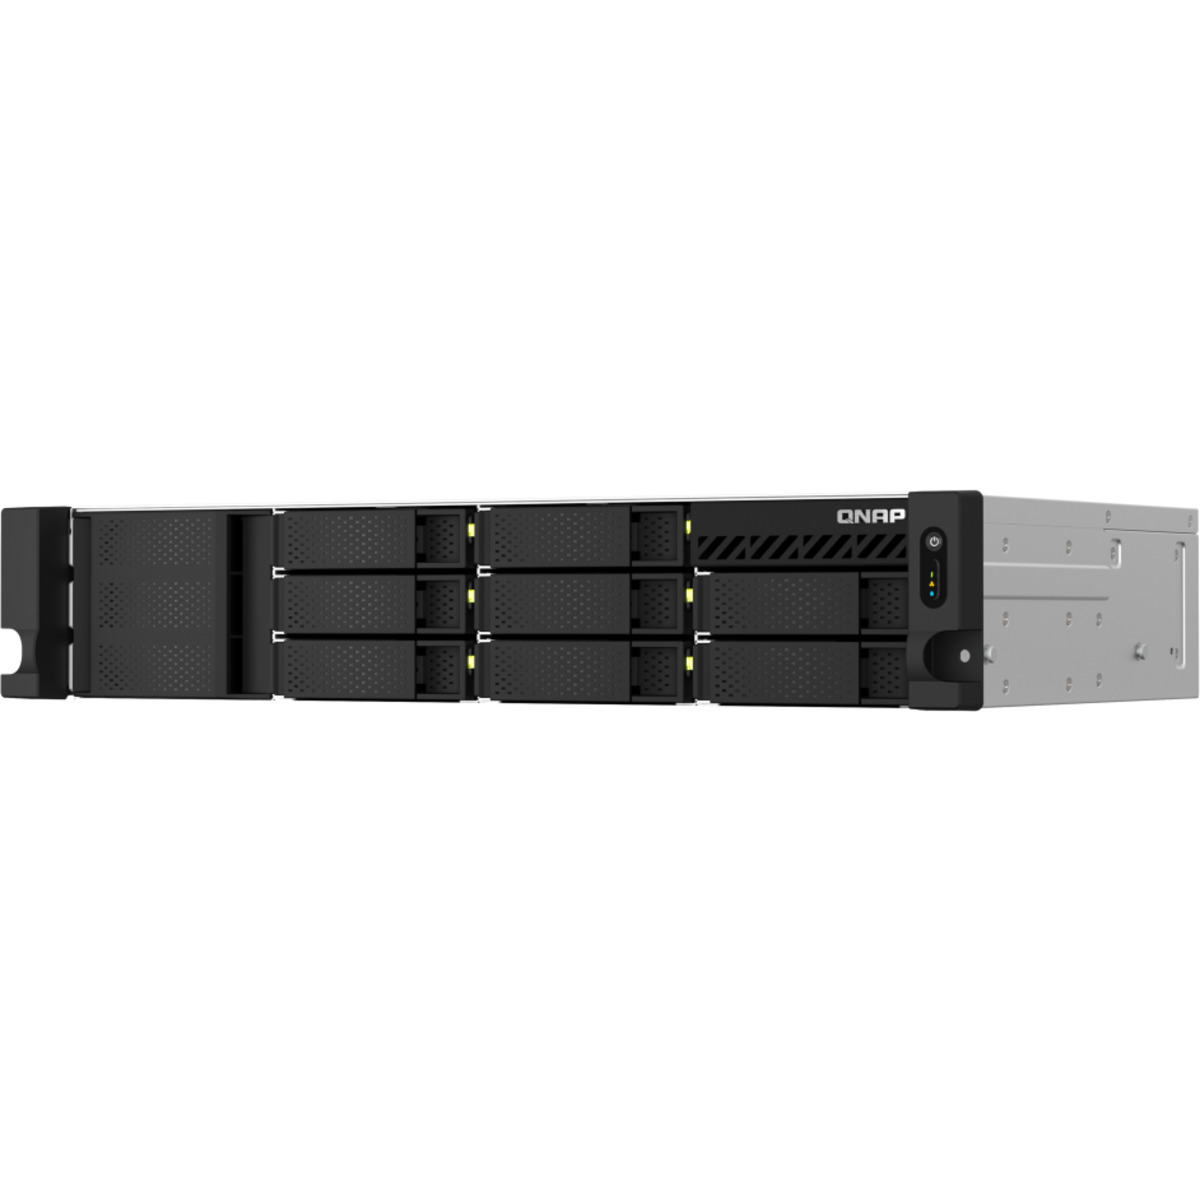 buy $3907 QNAP TS-864eU-RP 16tb RackMount NAS - Network Attached Storage Device 8x2000gb Western Digital Red SA500 WDS200T1R0A 2.5 560/530MB/s SATA 6Gb/s SSD NAS Class Drives Installed - Burn-In Tested - FREE RAM UPGRADE - nas headquarters buy network attached storage server device das new raid-5 free shipping usa TS-864eU-RP